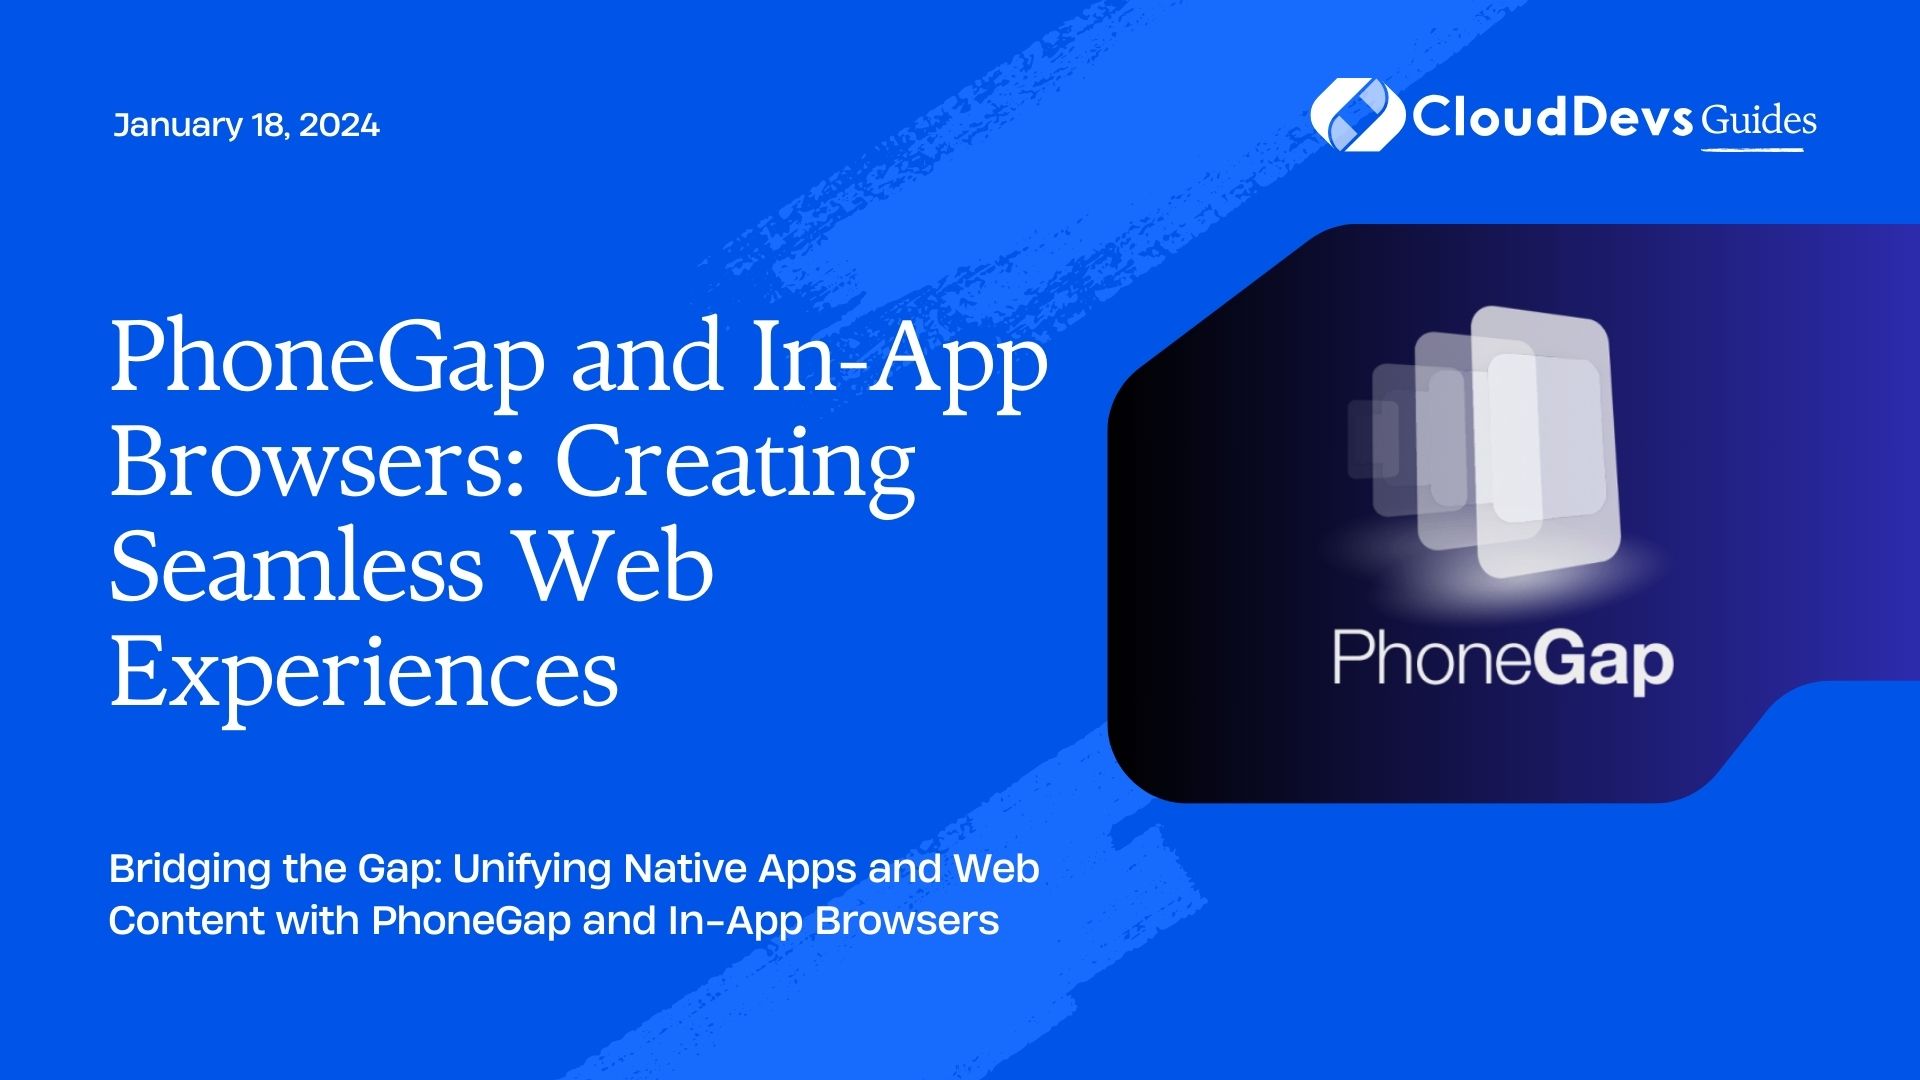 PhoneGap and In-App Browsers: Creating Seamless Web Experiences